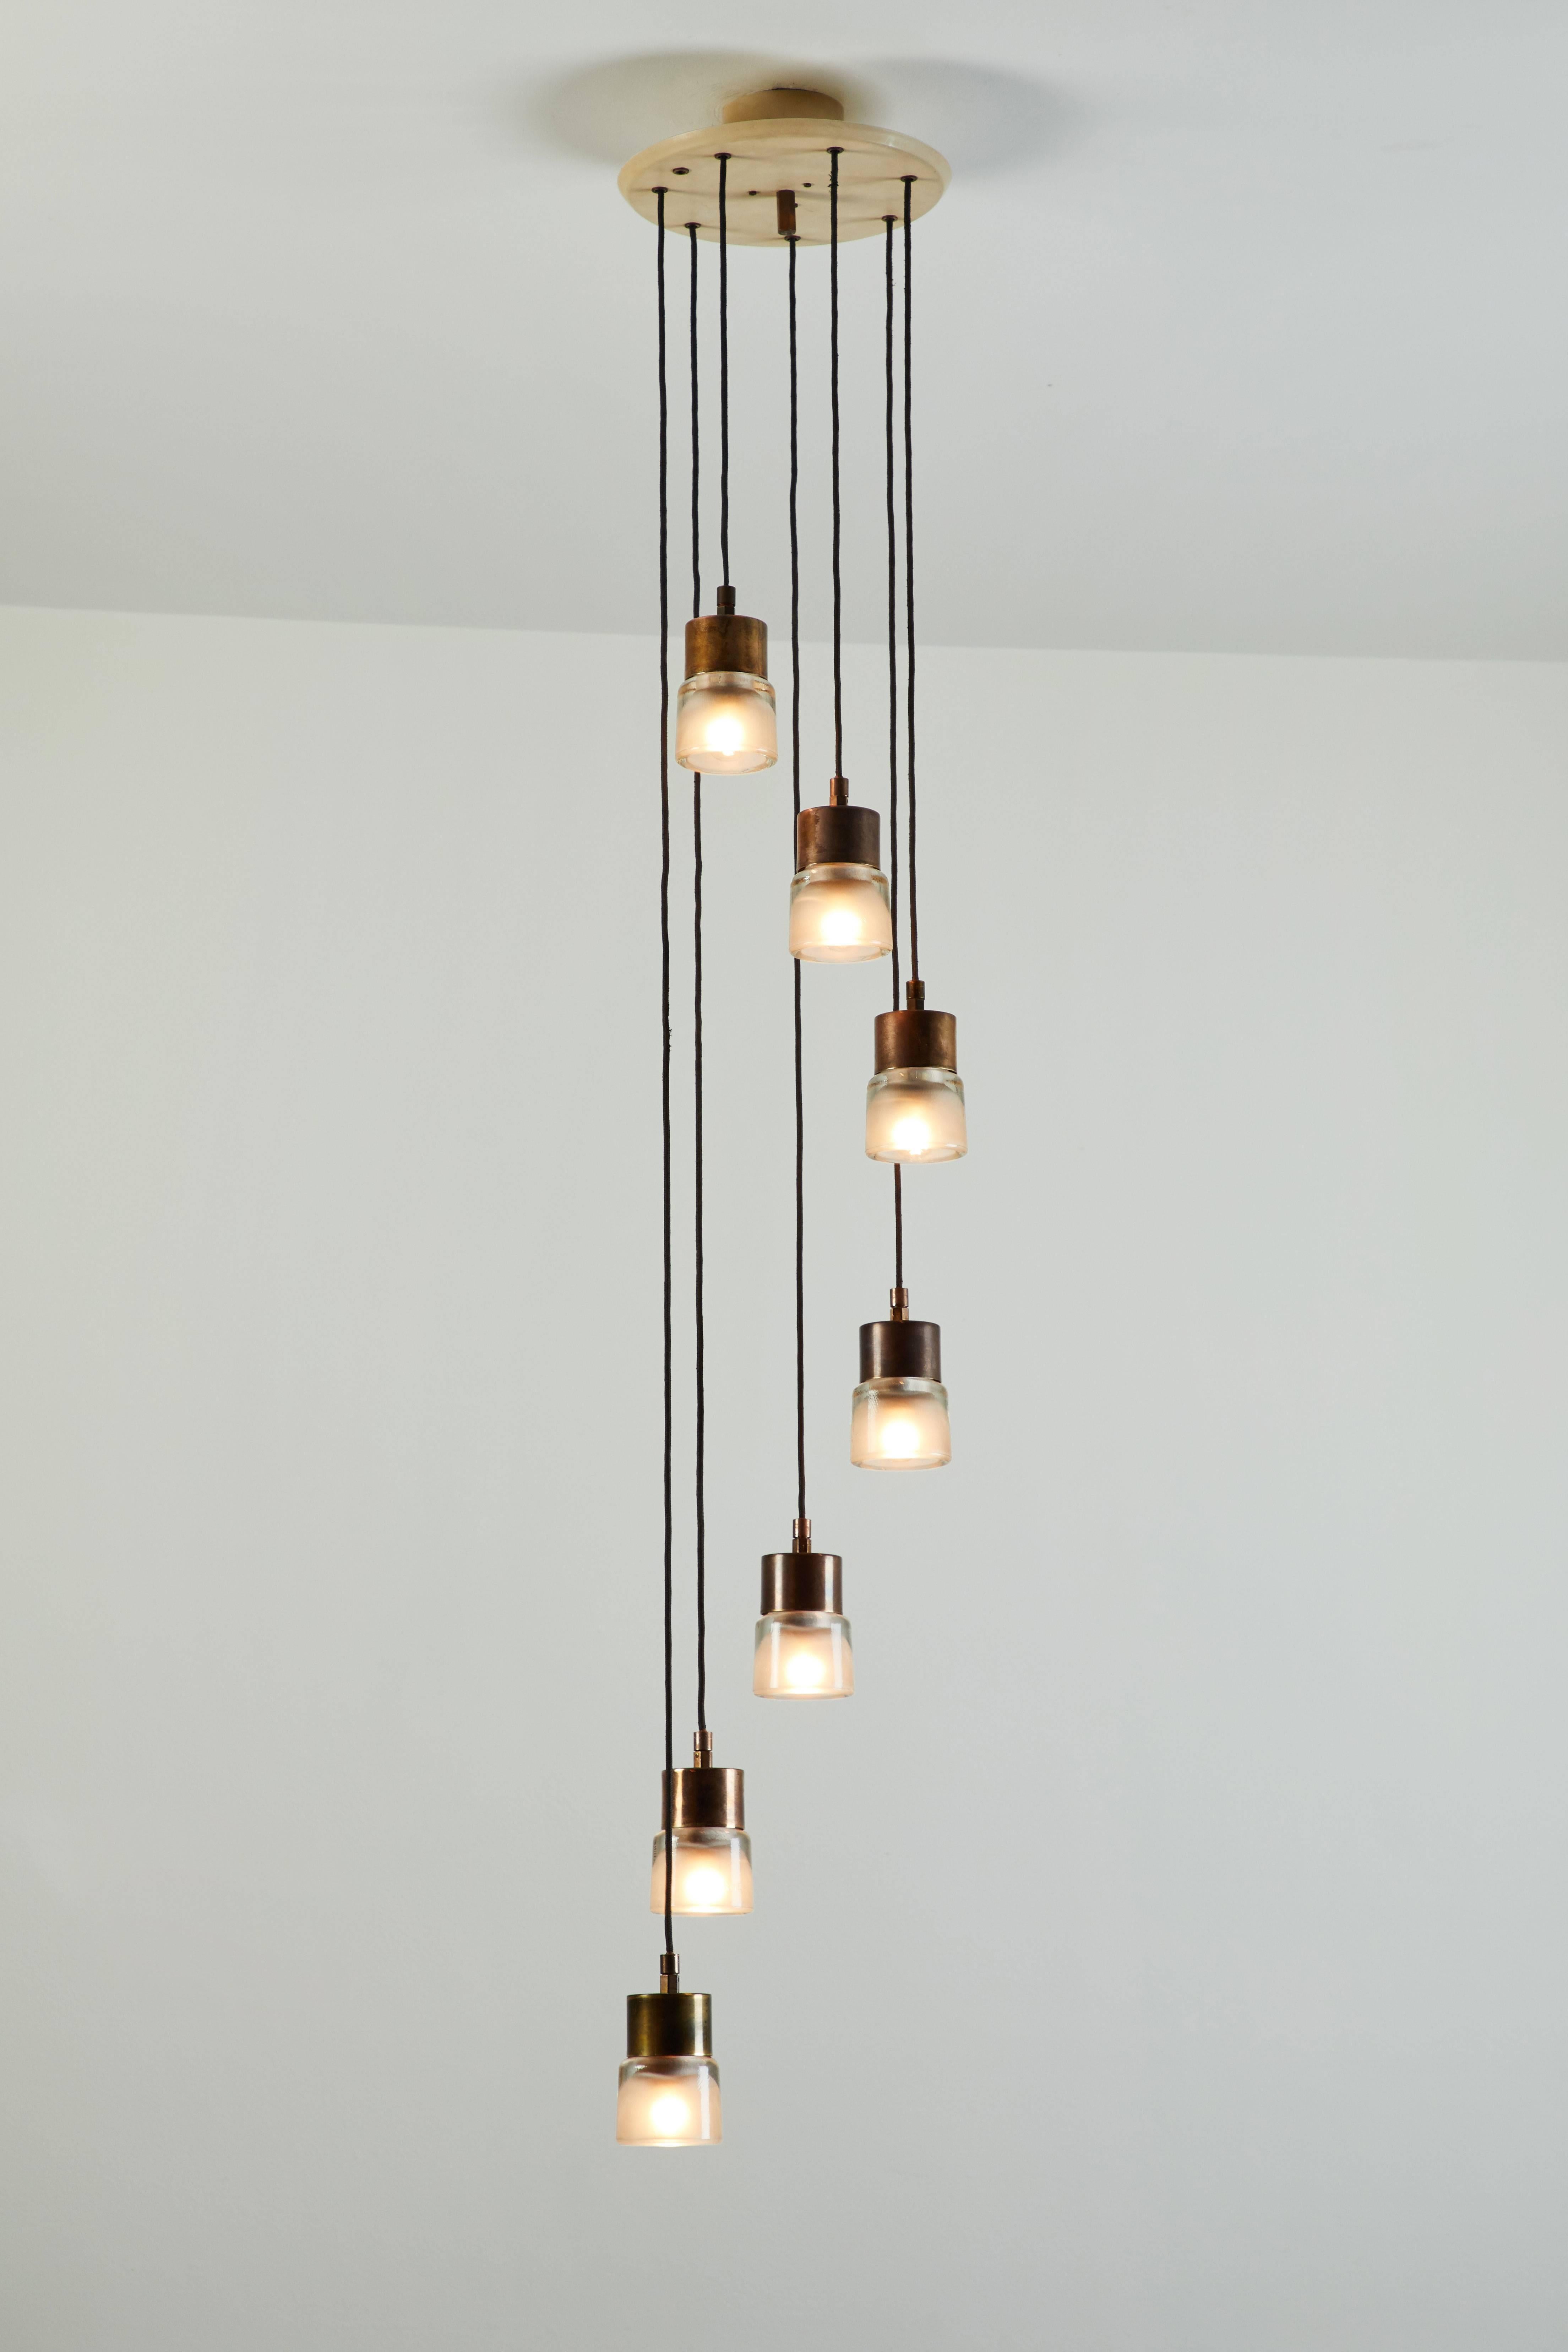 Original nine shade cascading chandelier designed by Tito Agnoli for Oluce in Italy, circa 1950s. Painted aluminum, brass and pressed glass. Wired for US junction boxes. Each socket takes an E14 European candelabra 25w maximum bulb.